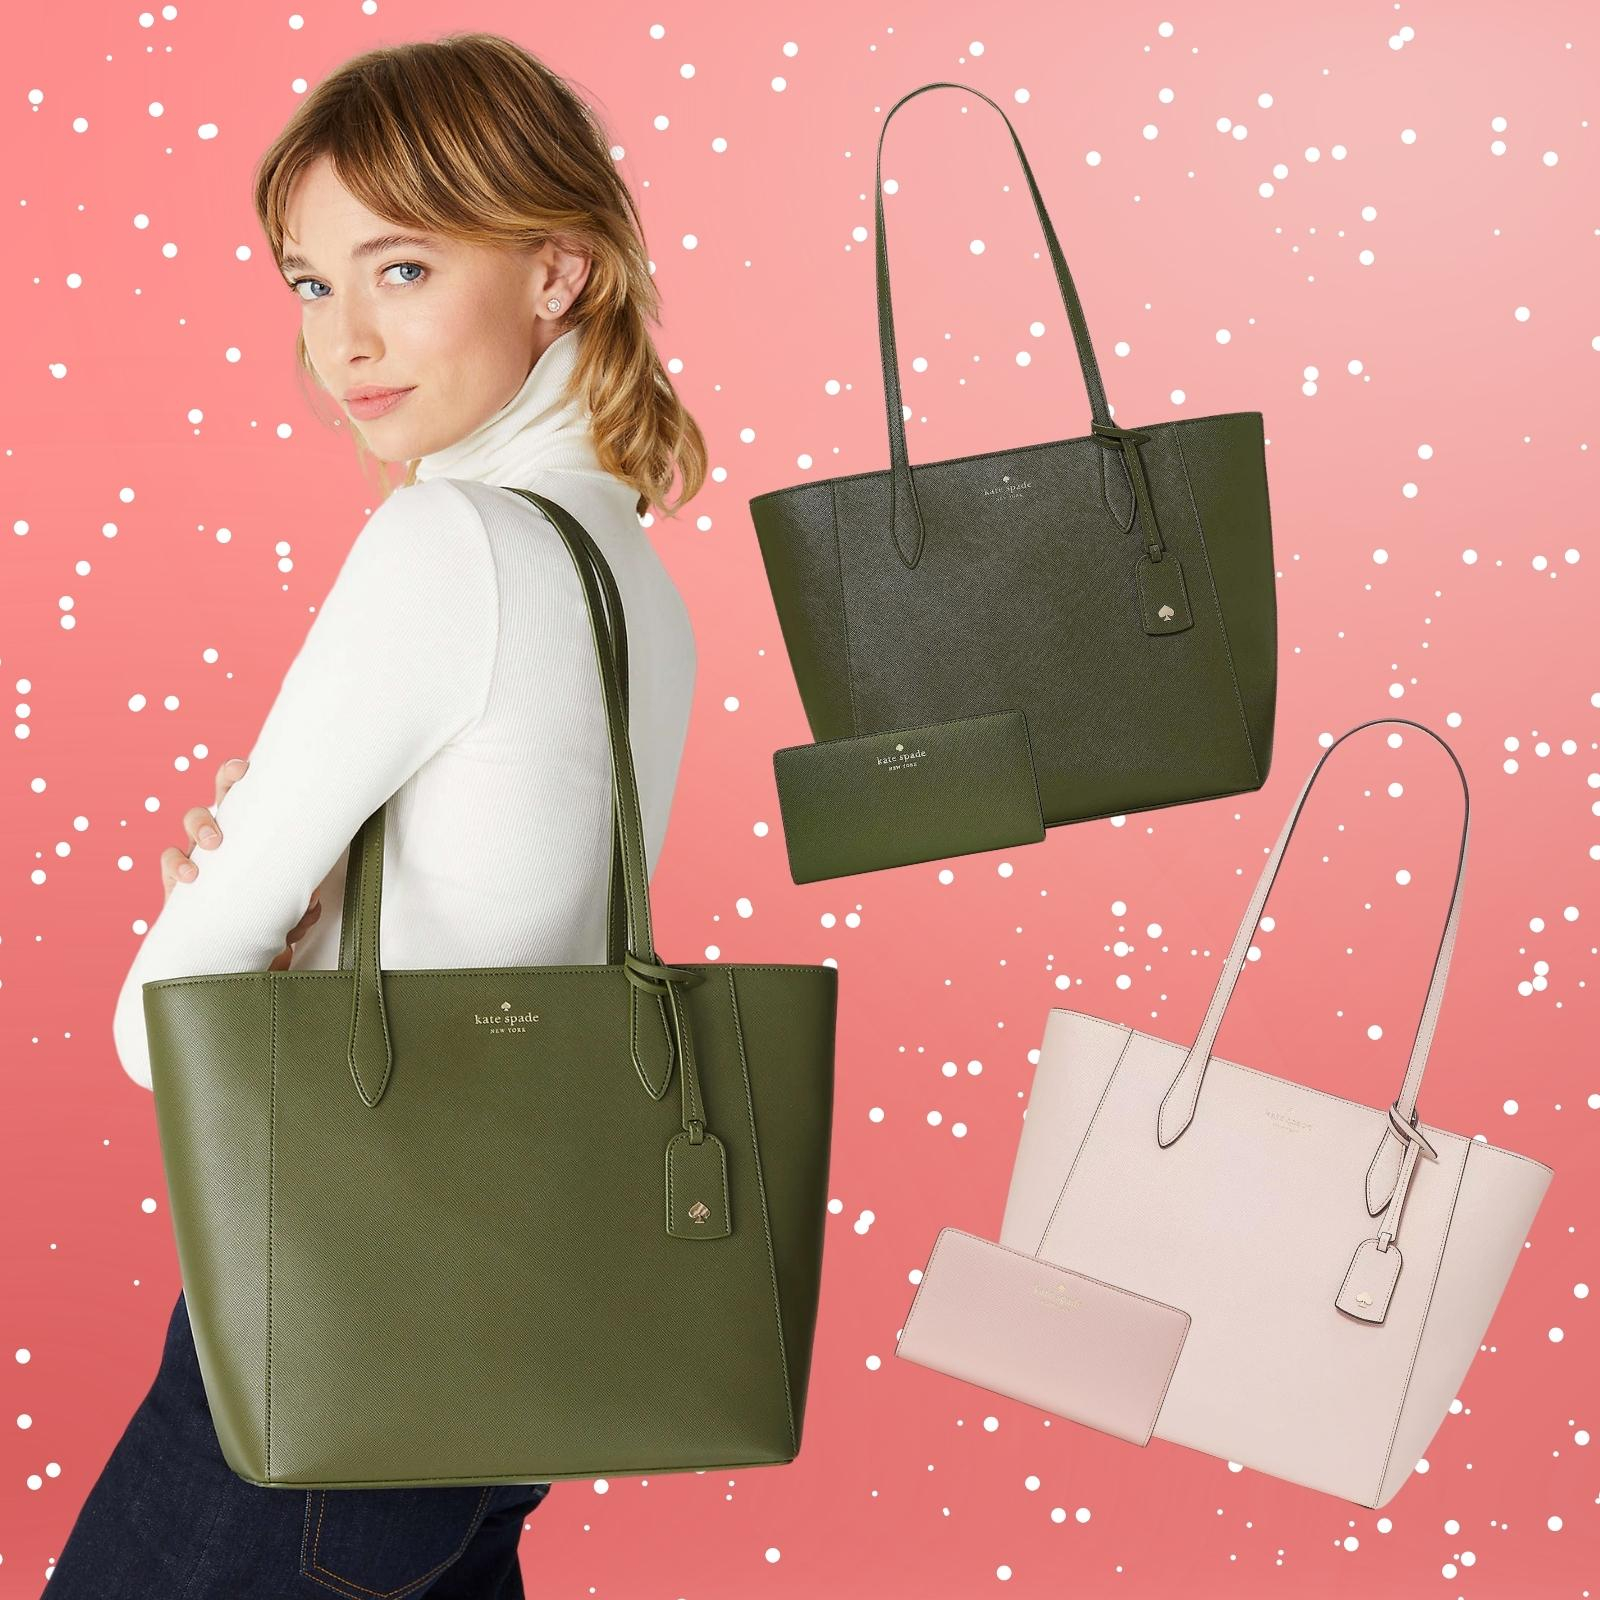 Get This $538 Tote & Wallet Bundle for $109